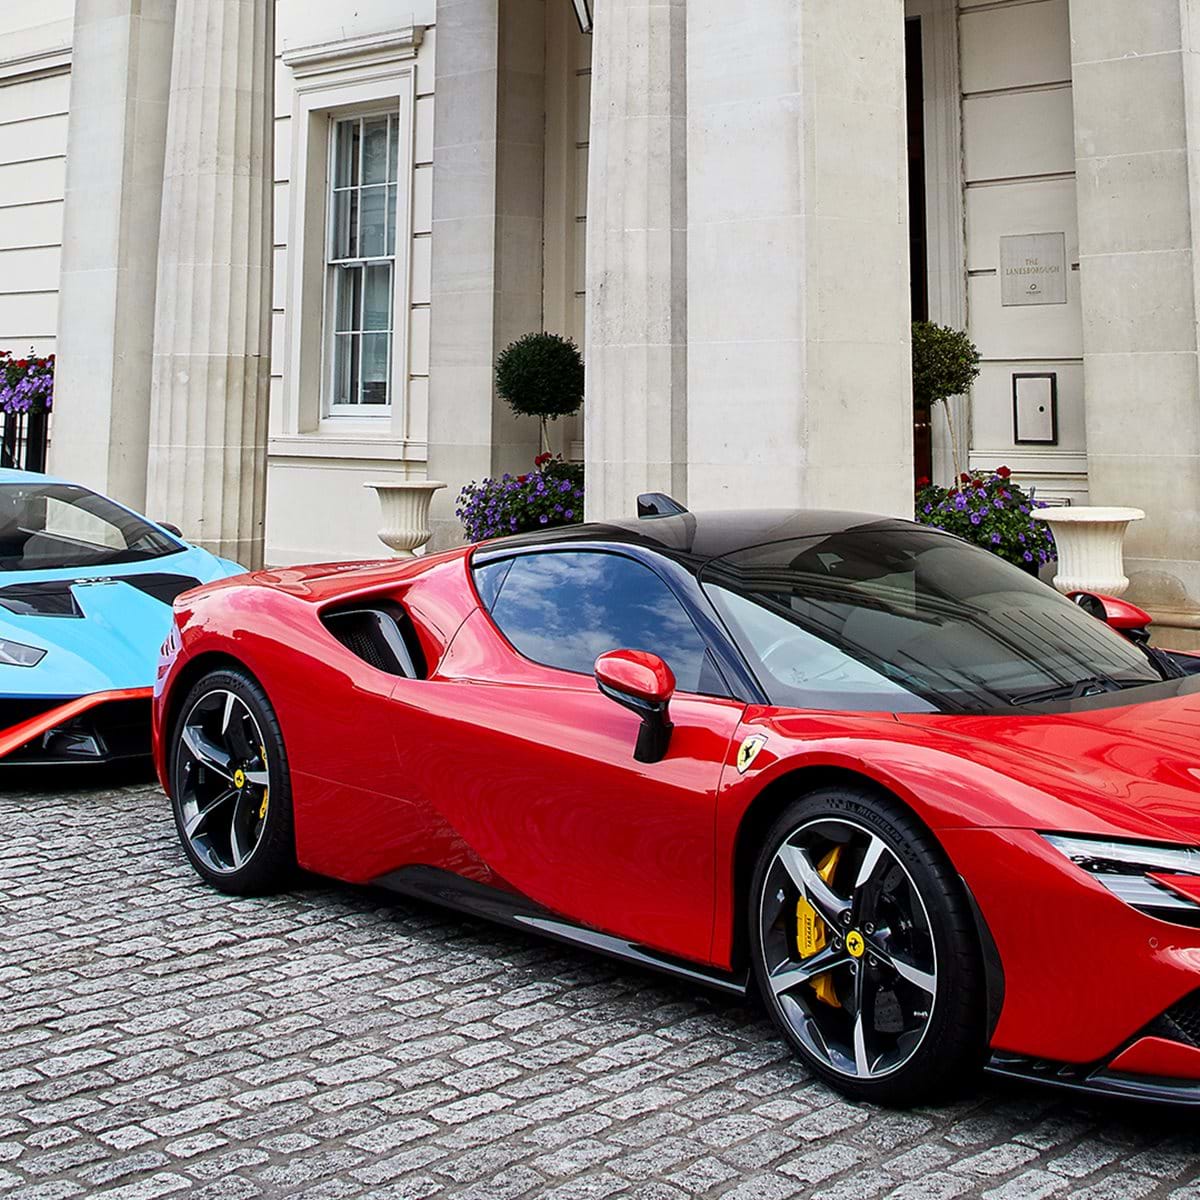 Supercars at The Lanesborough | Luxury London Supercar Experience